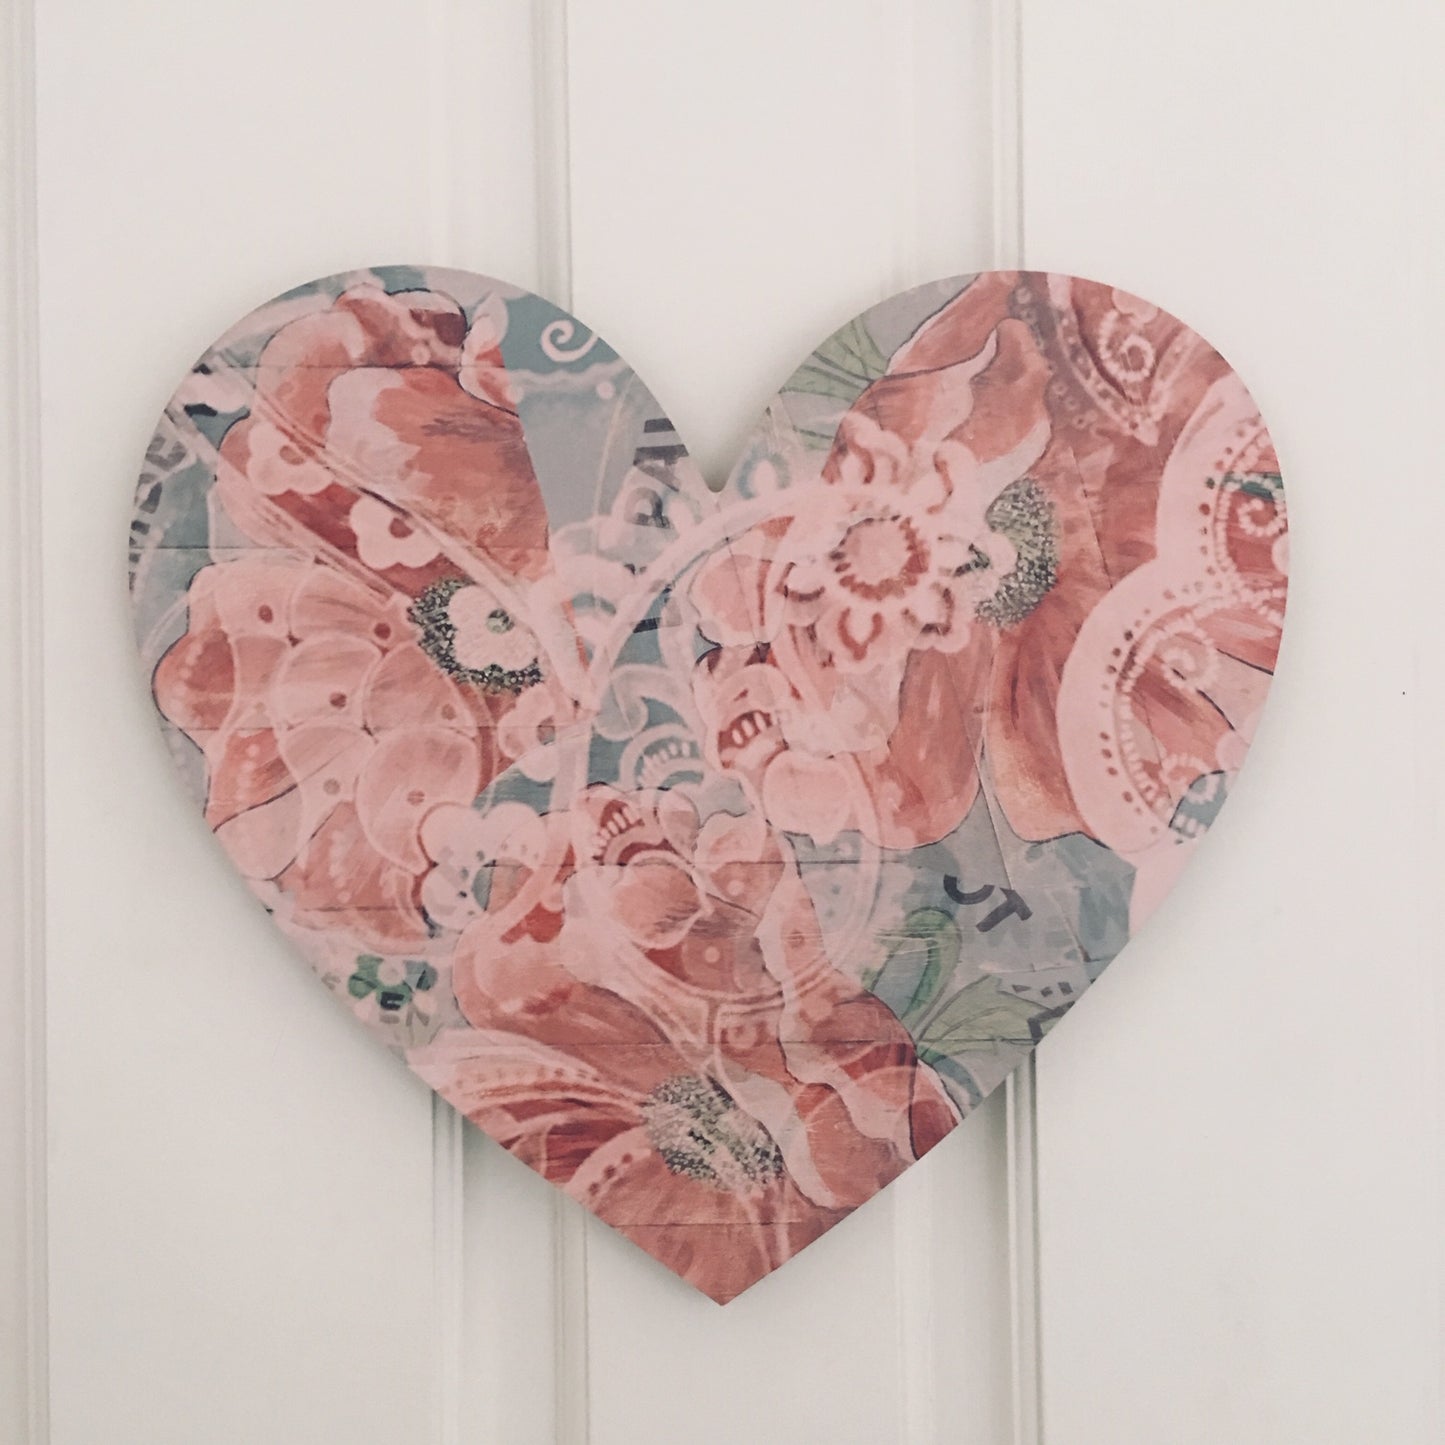 Heart Board Red and Blue Poppy Art decor